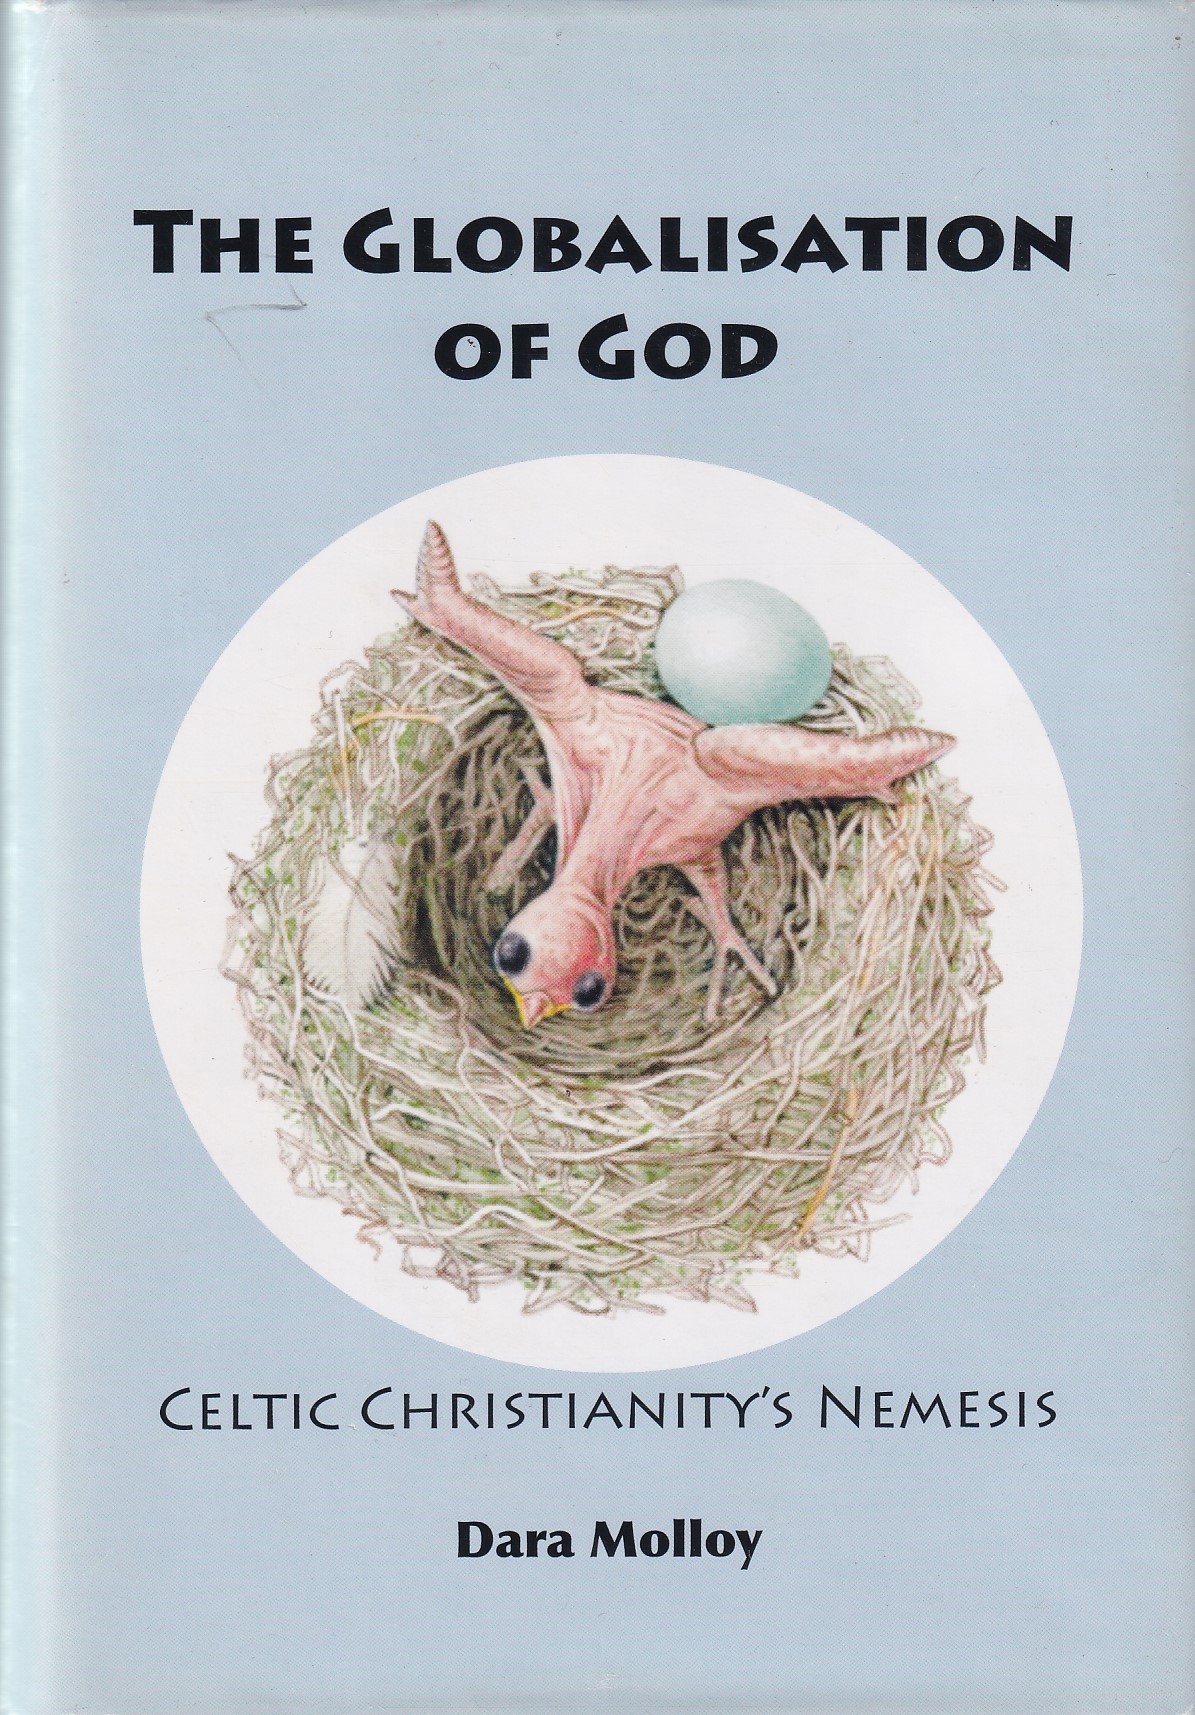 The Globalisation of God: Celtic Christianity’s Nemesis [Signed] by Dara Molloy